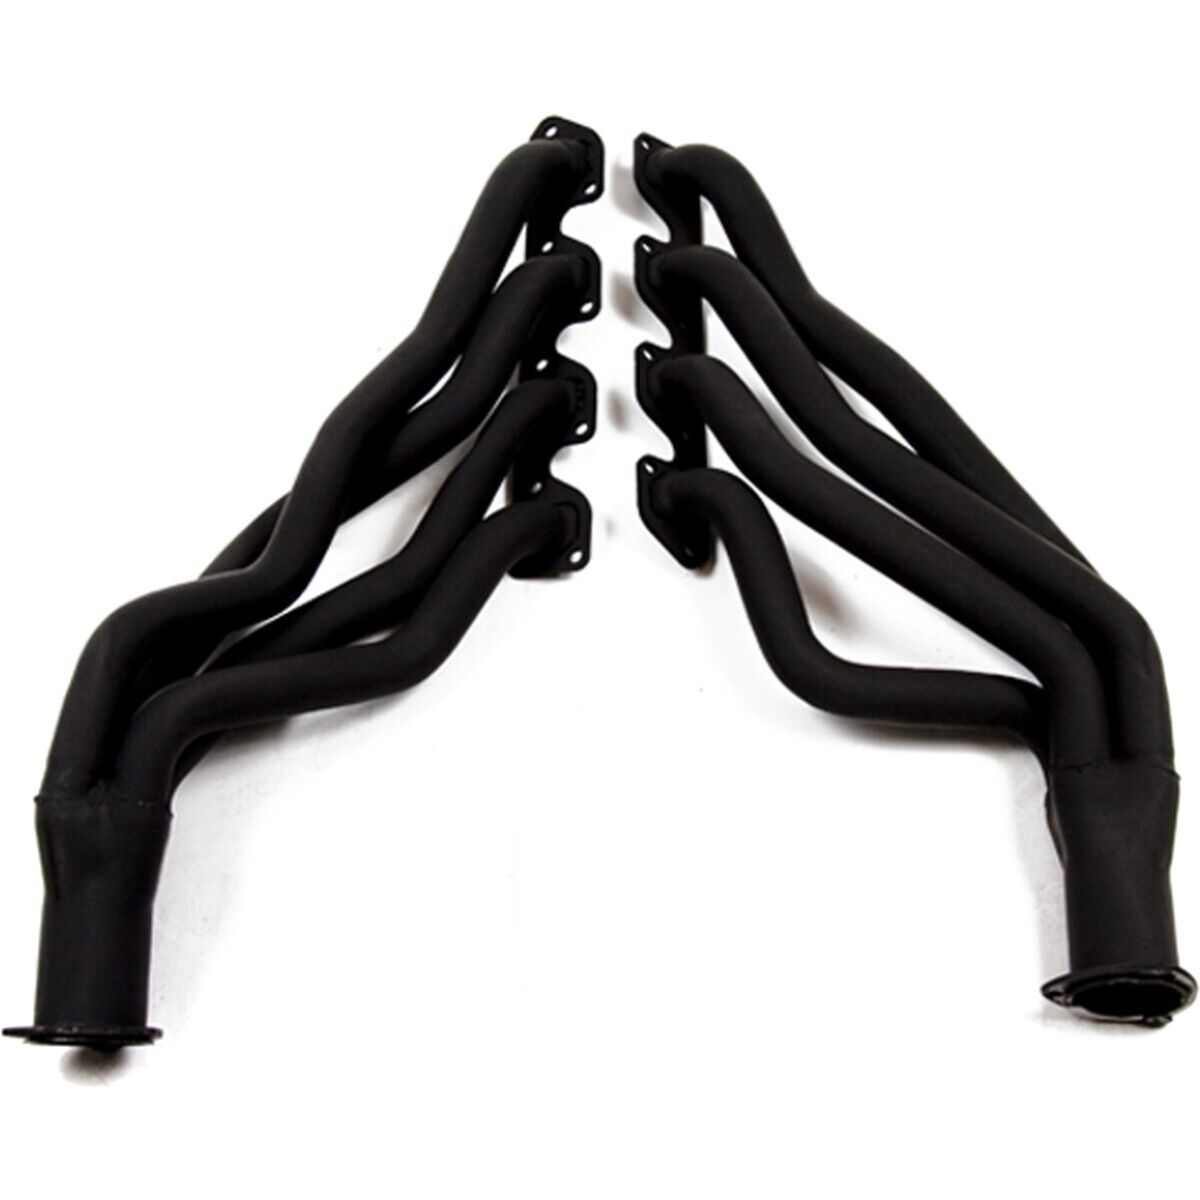 12118FLT Flowtech Set of 2 Headers for Ford Mustang Mercury Cougar Montego Pair